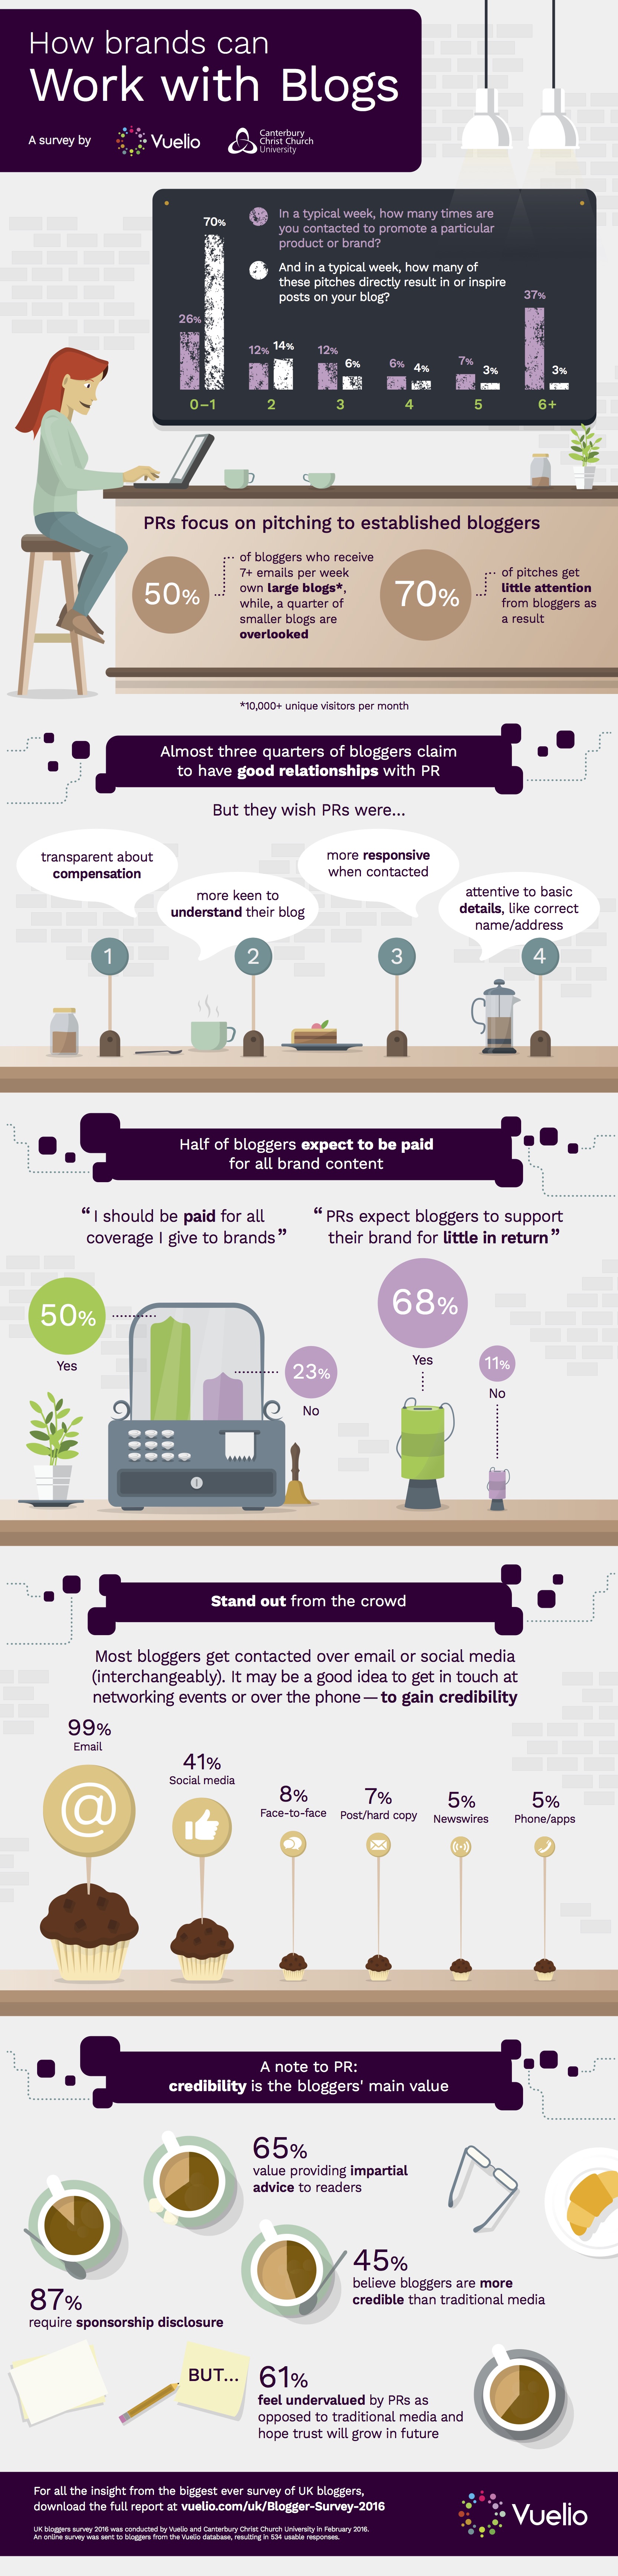 Vuelio Bloggers Survey - How Brands Work With Blogs[1]